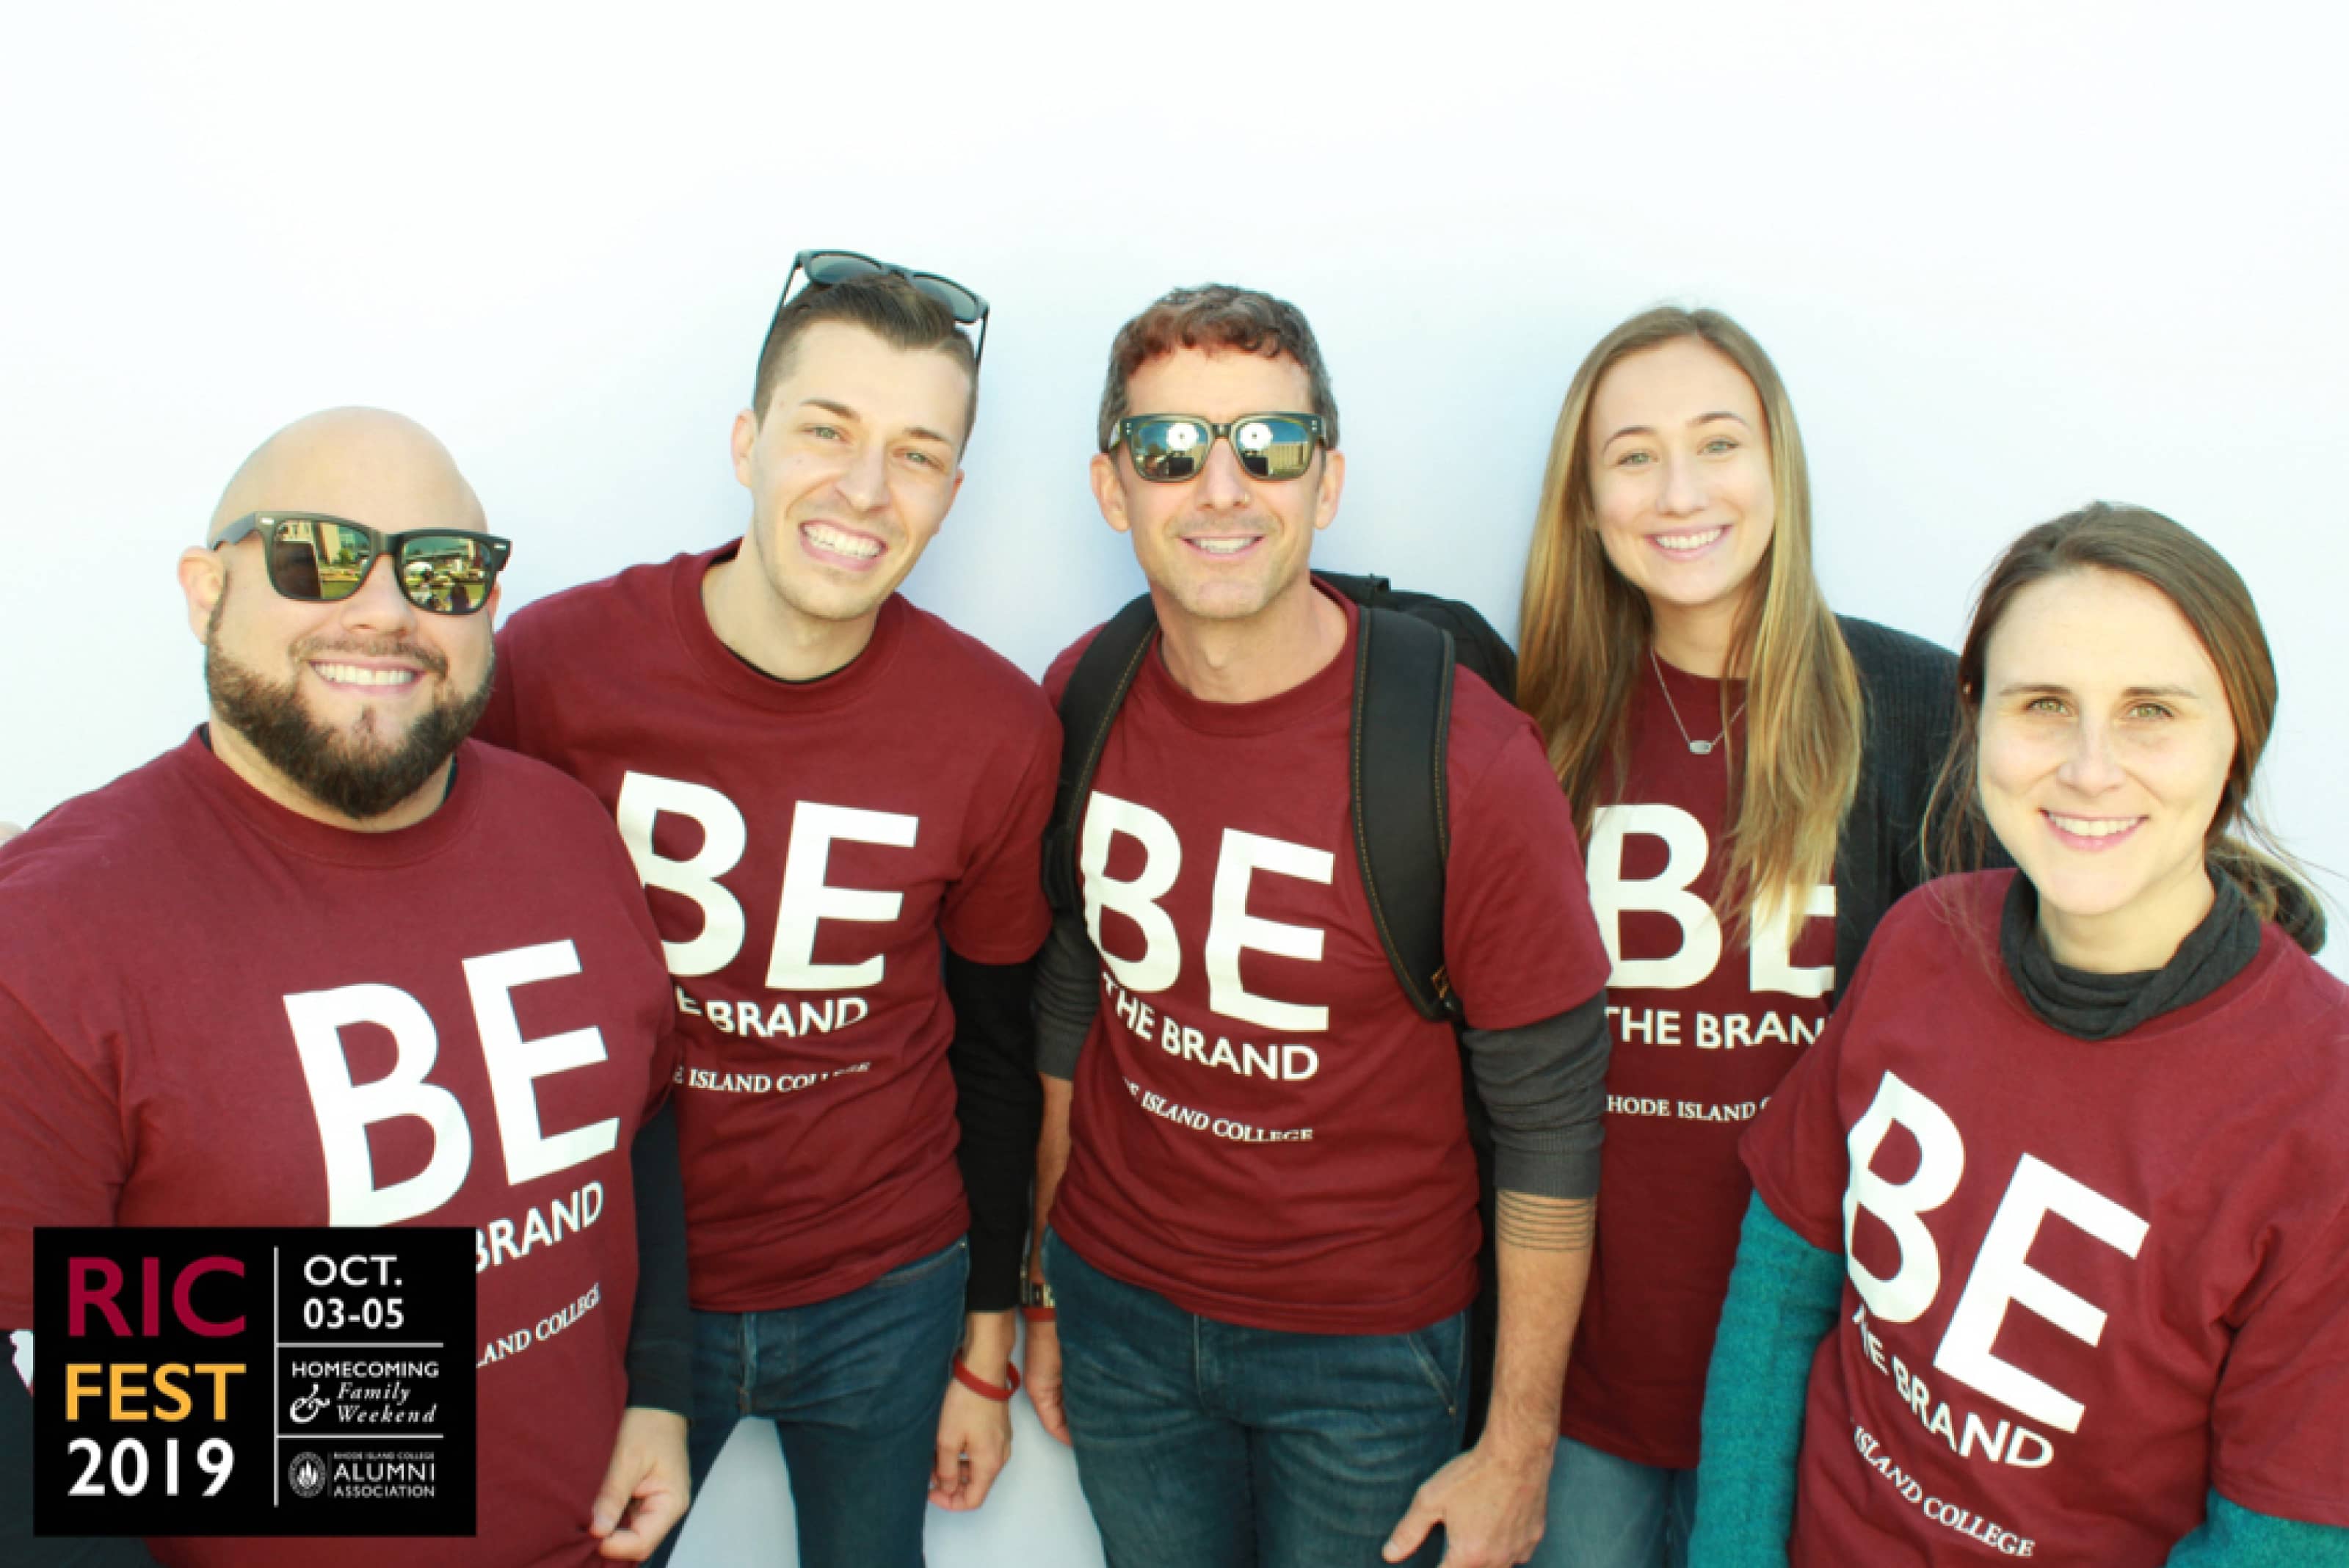 (add)ventures research staff wearing “Be the Brand” shirts get ready to interview students and staff on campus